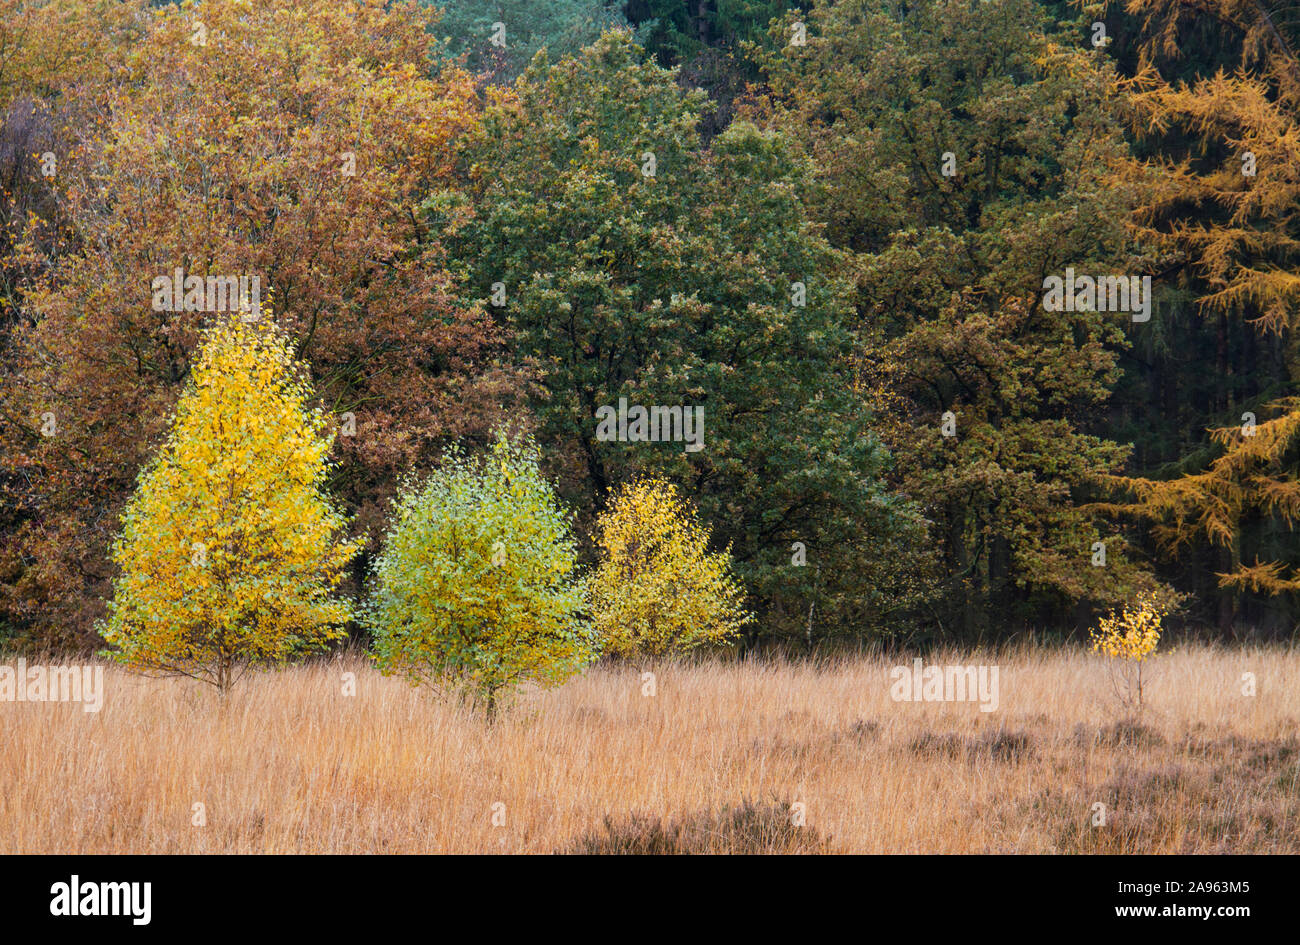 Young Birch trees in autumn colors a heath, grown with Purple moor grass, in the background a forest Stock Photo